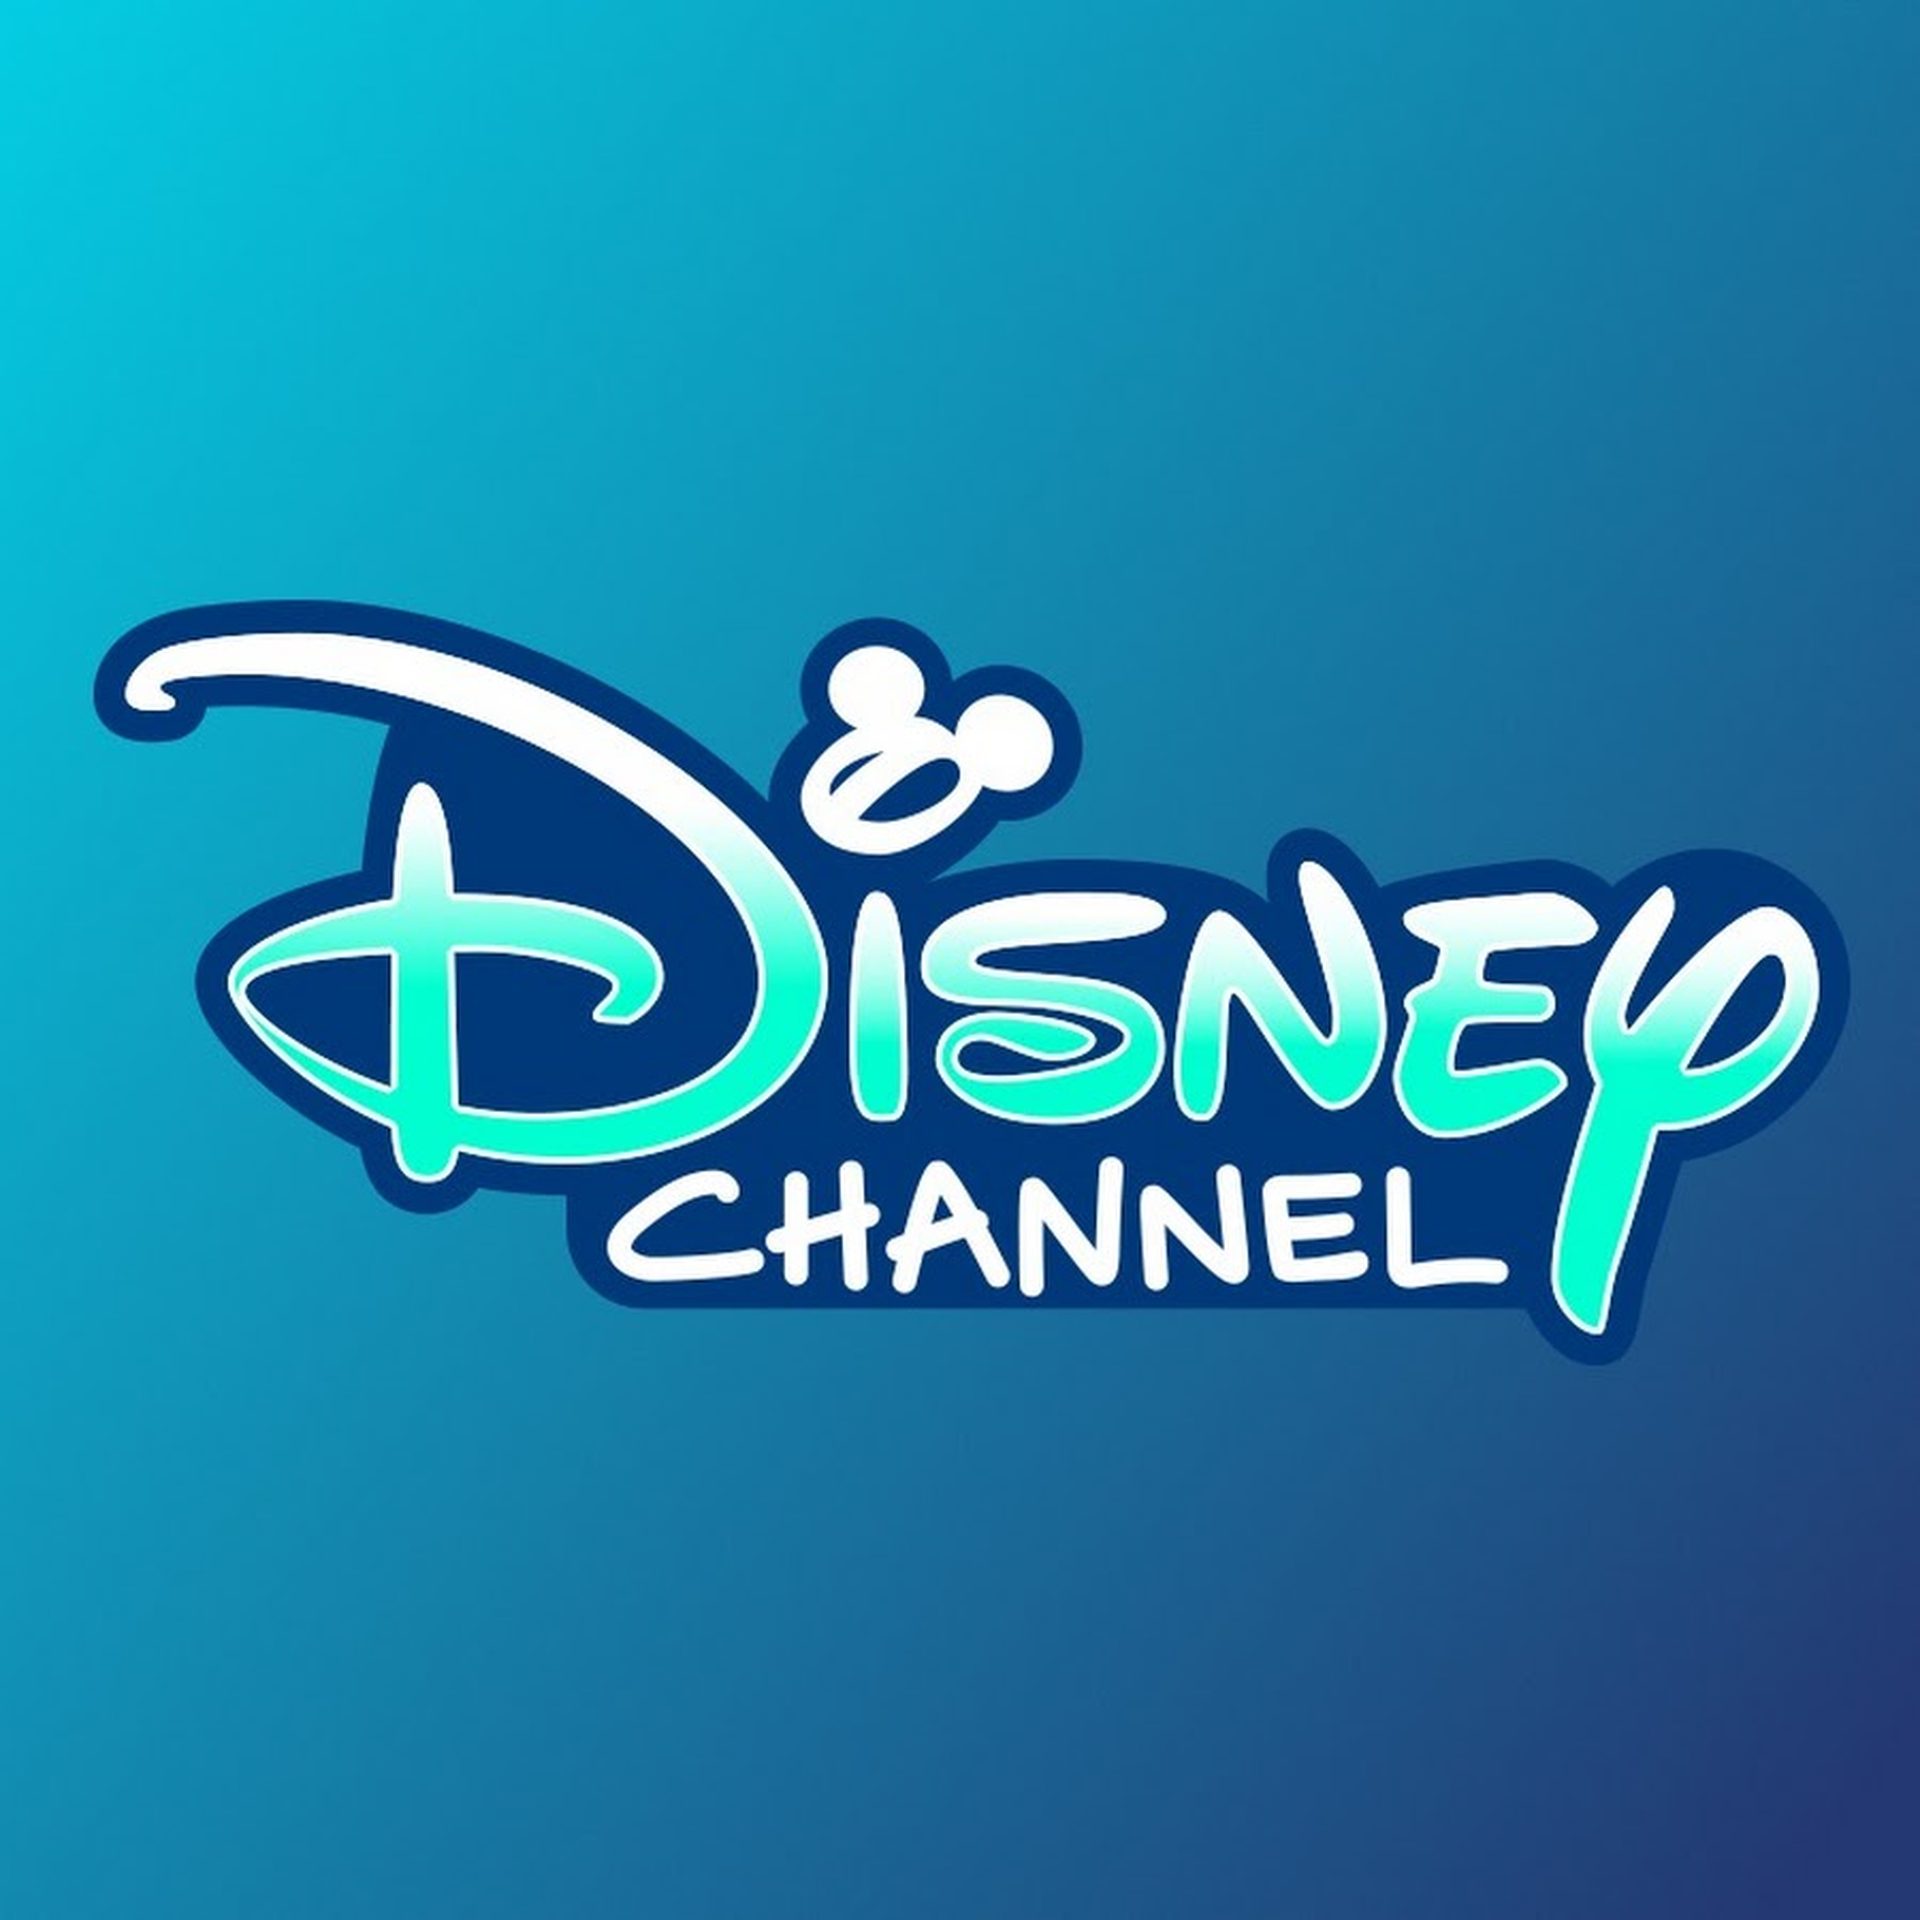 Disney Channel ceases broadcasting